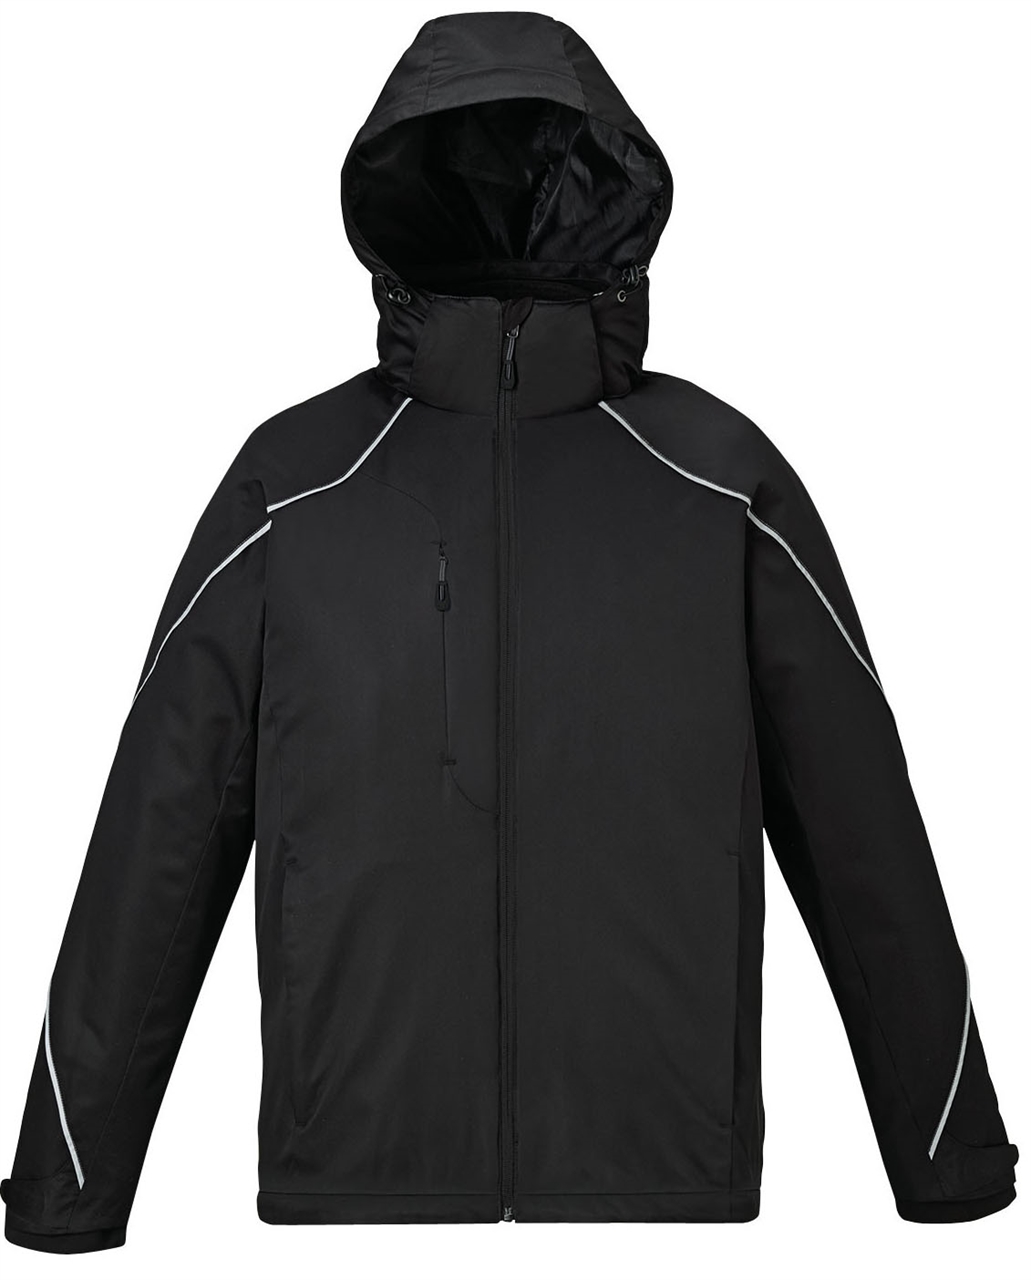 Picture of North End Men's Angle 3-in-1 Jacket with Bonded Fleece Liner